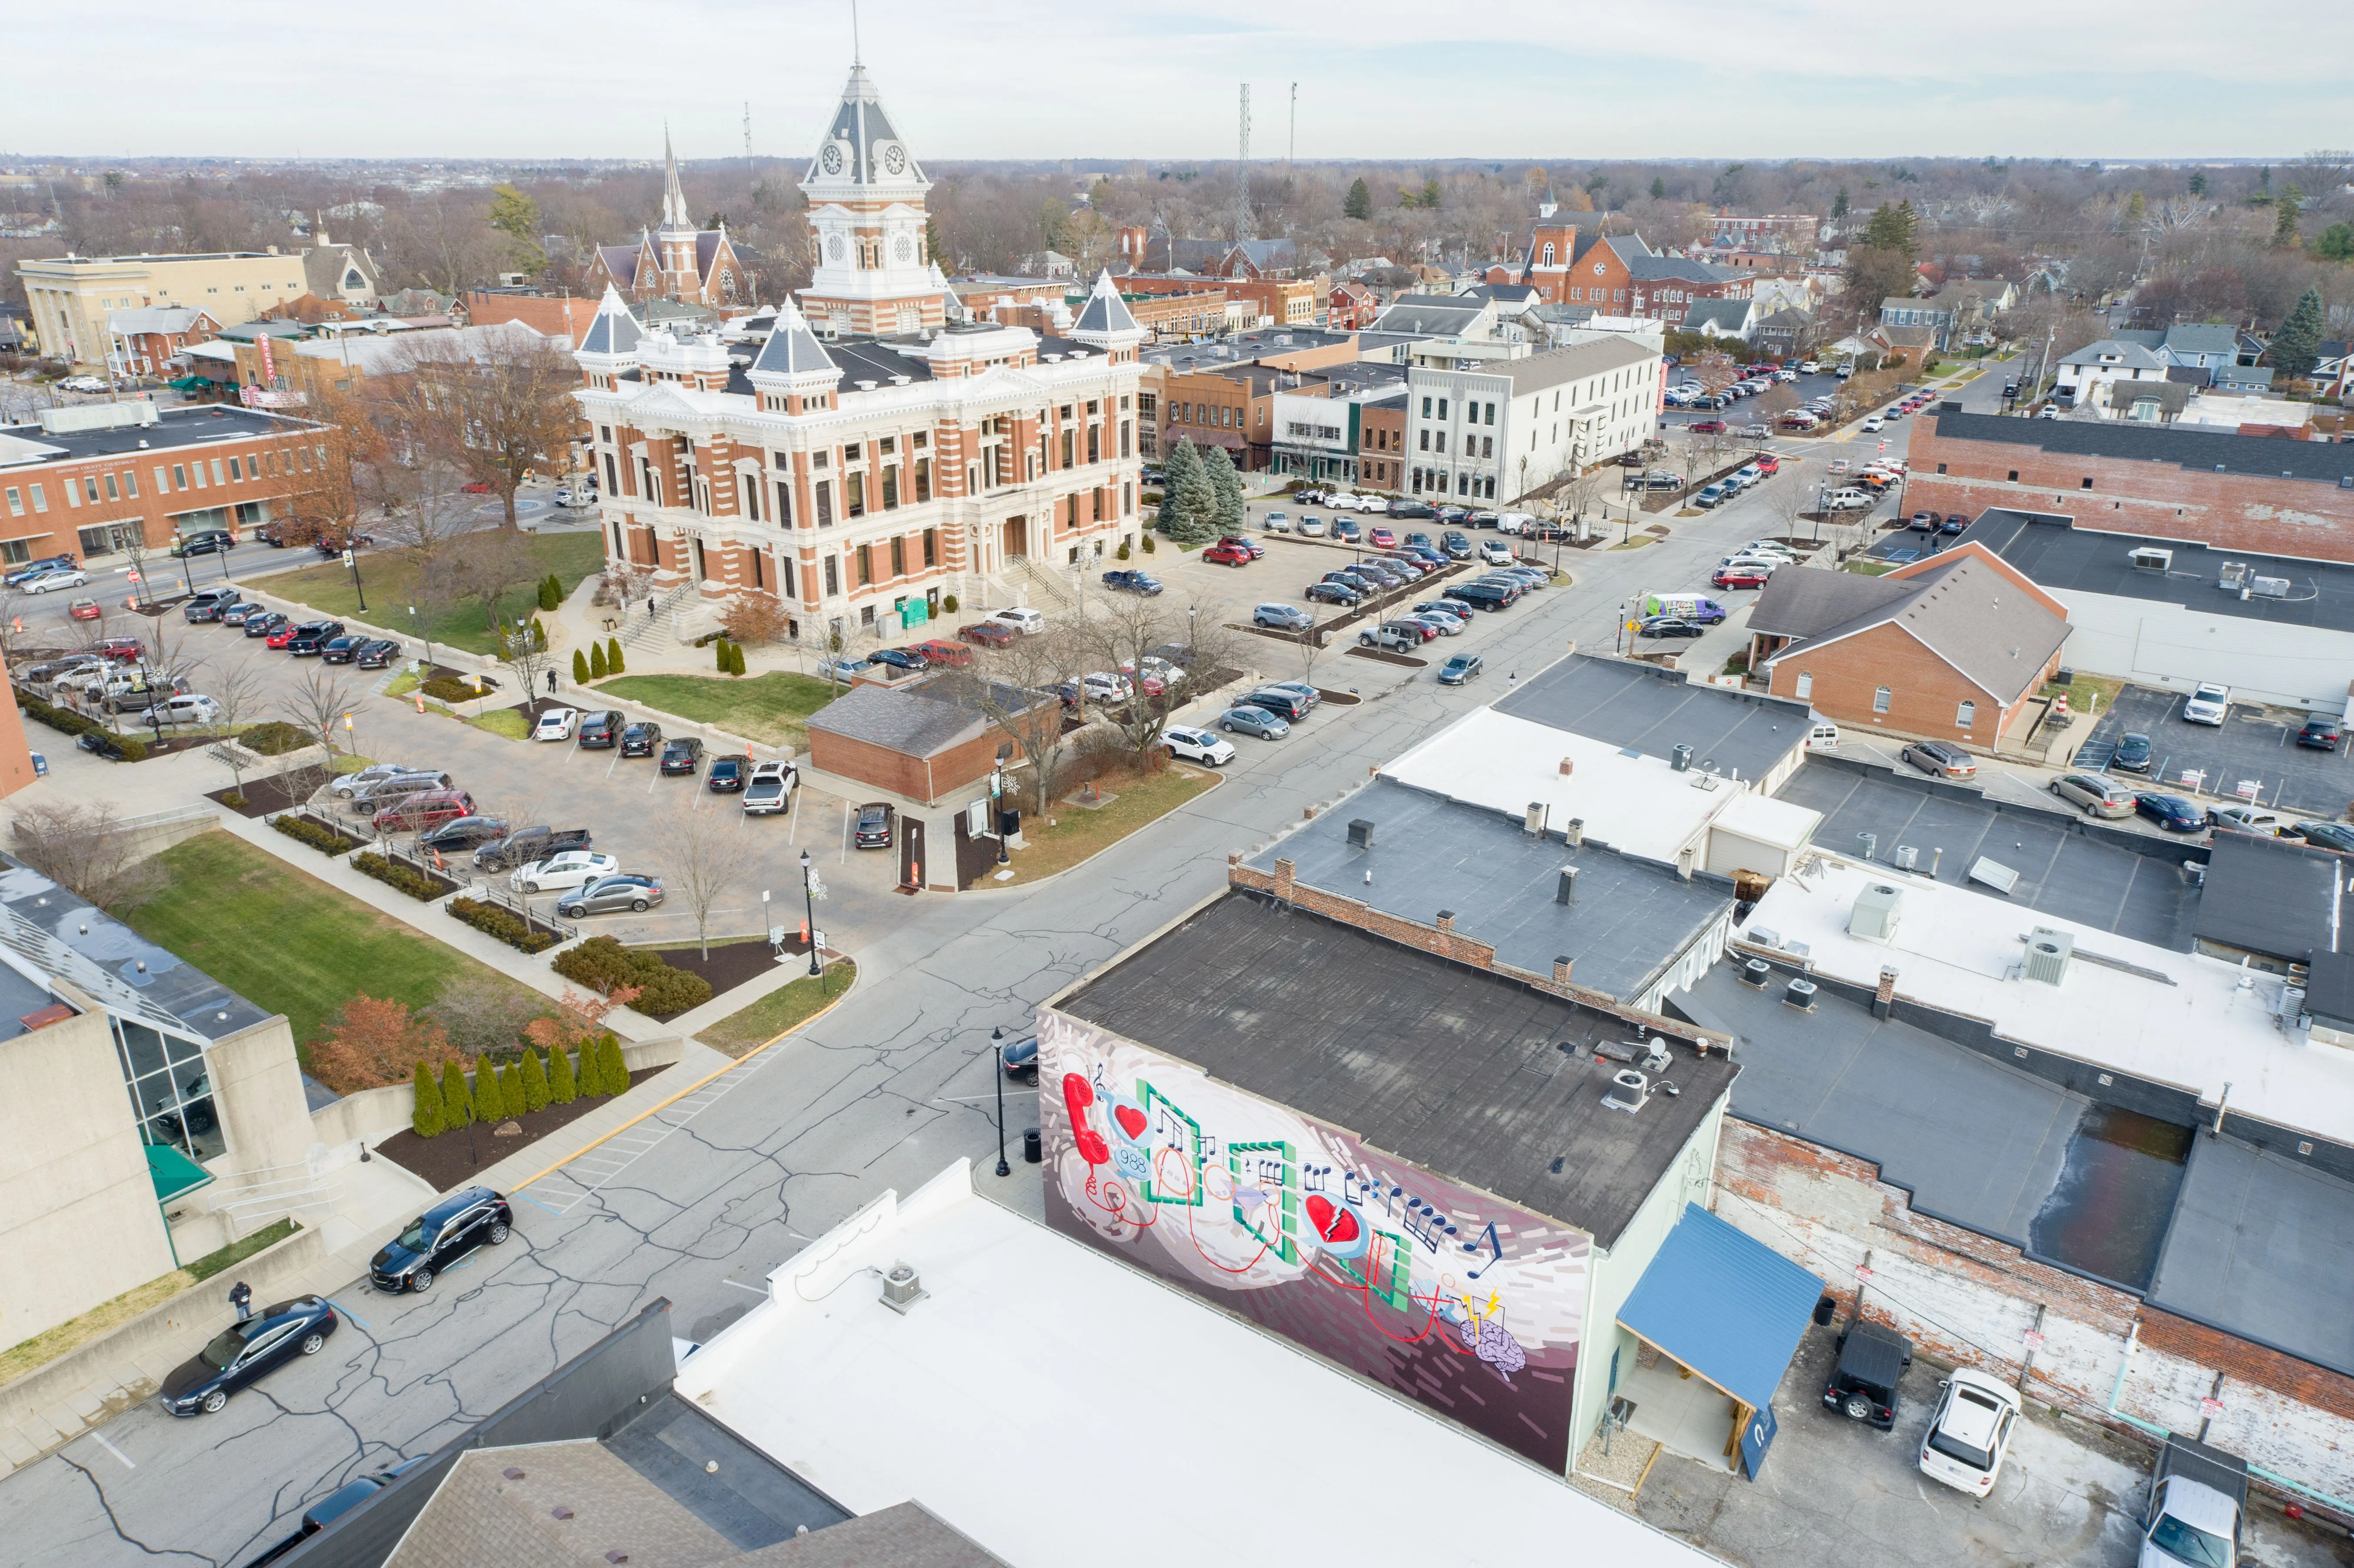 Aerial view of a small town with historic buildings and a courthouse with a dome.